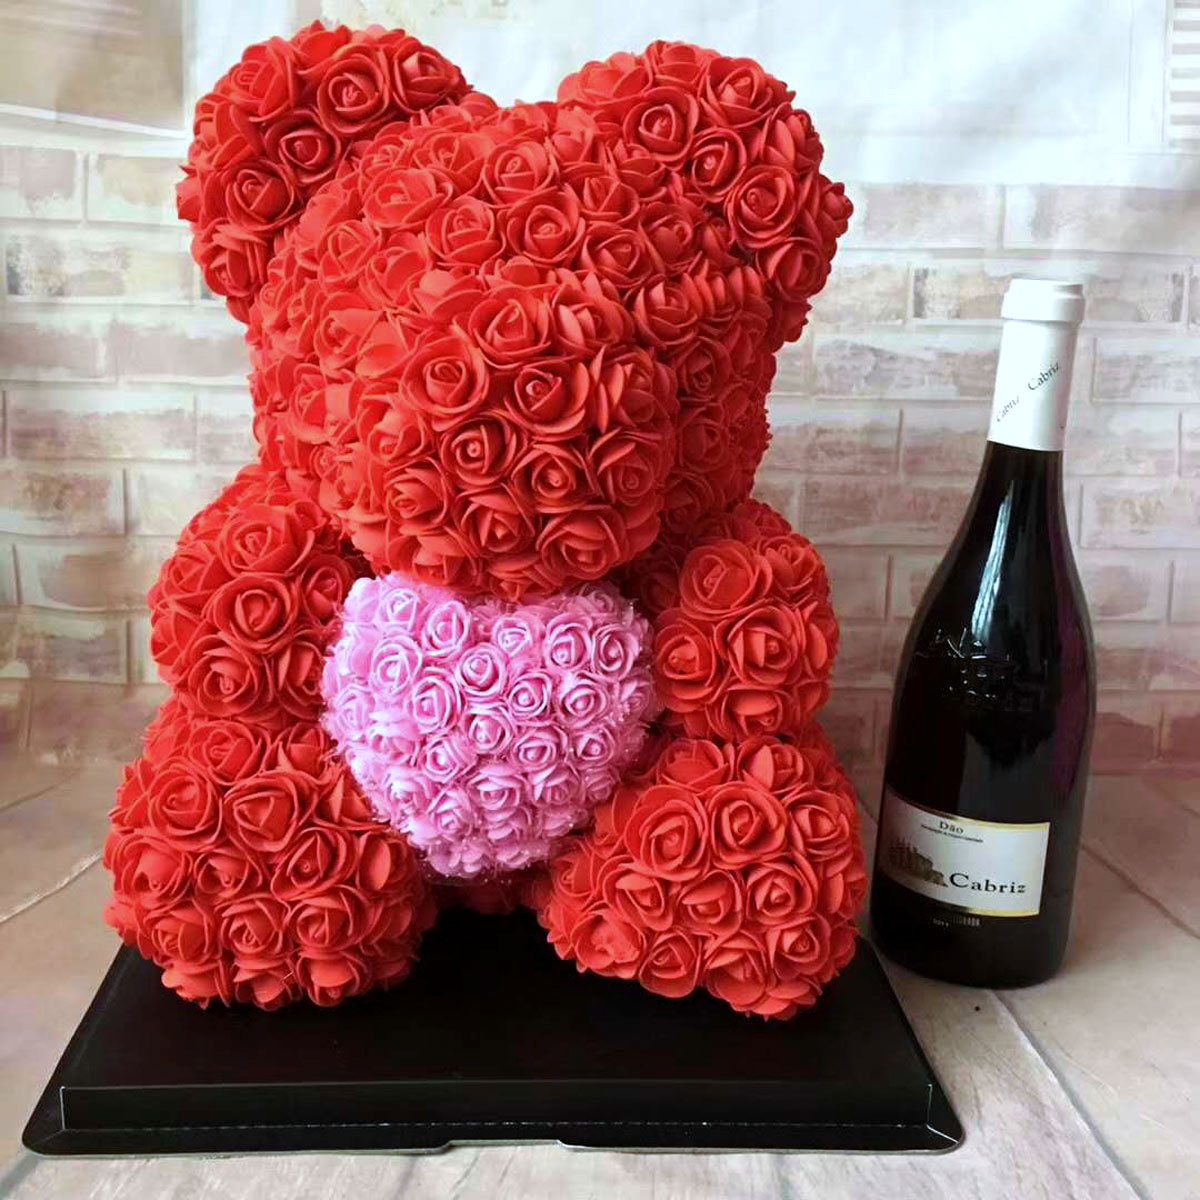 Valentines Day Ideas Gift
 9 Wine Valentines Day Gift Ideas for Her